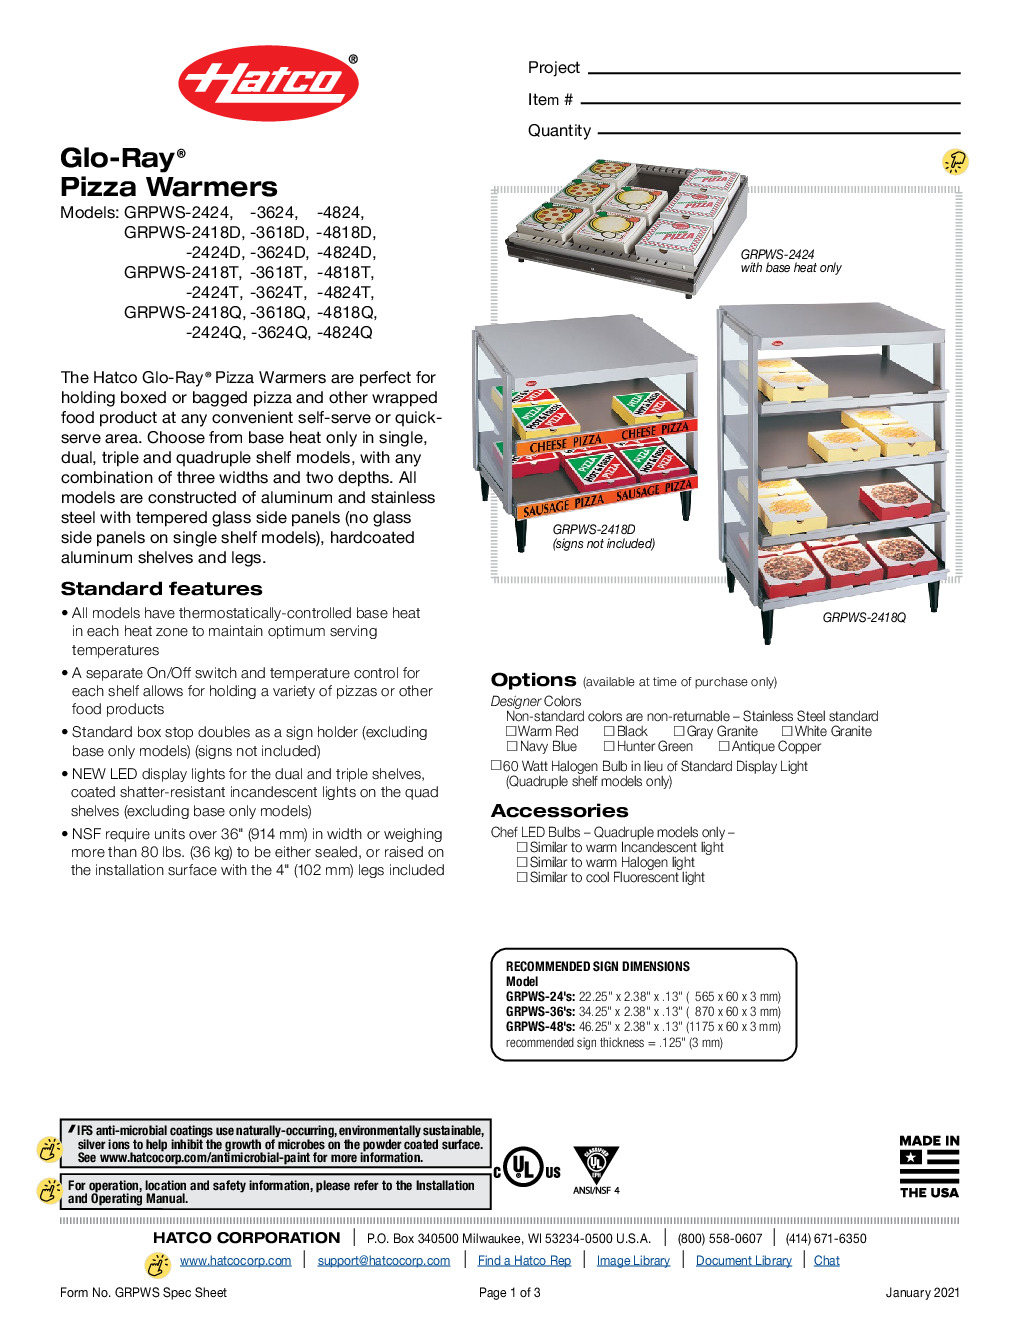 Hatco GRPWS-4818T For Multi-Product Heated Display Merchandiser